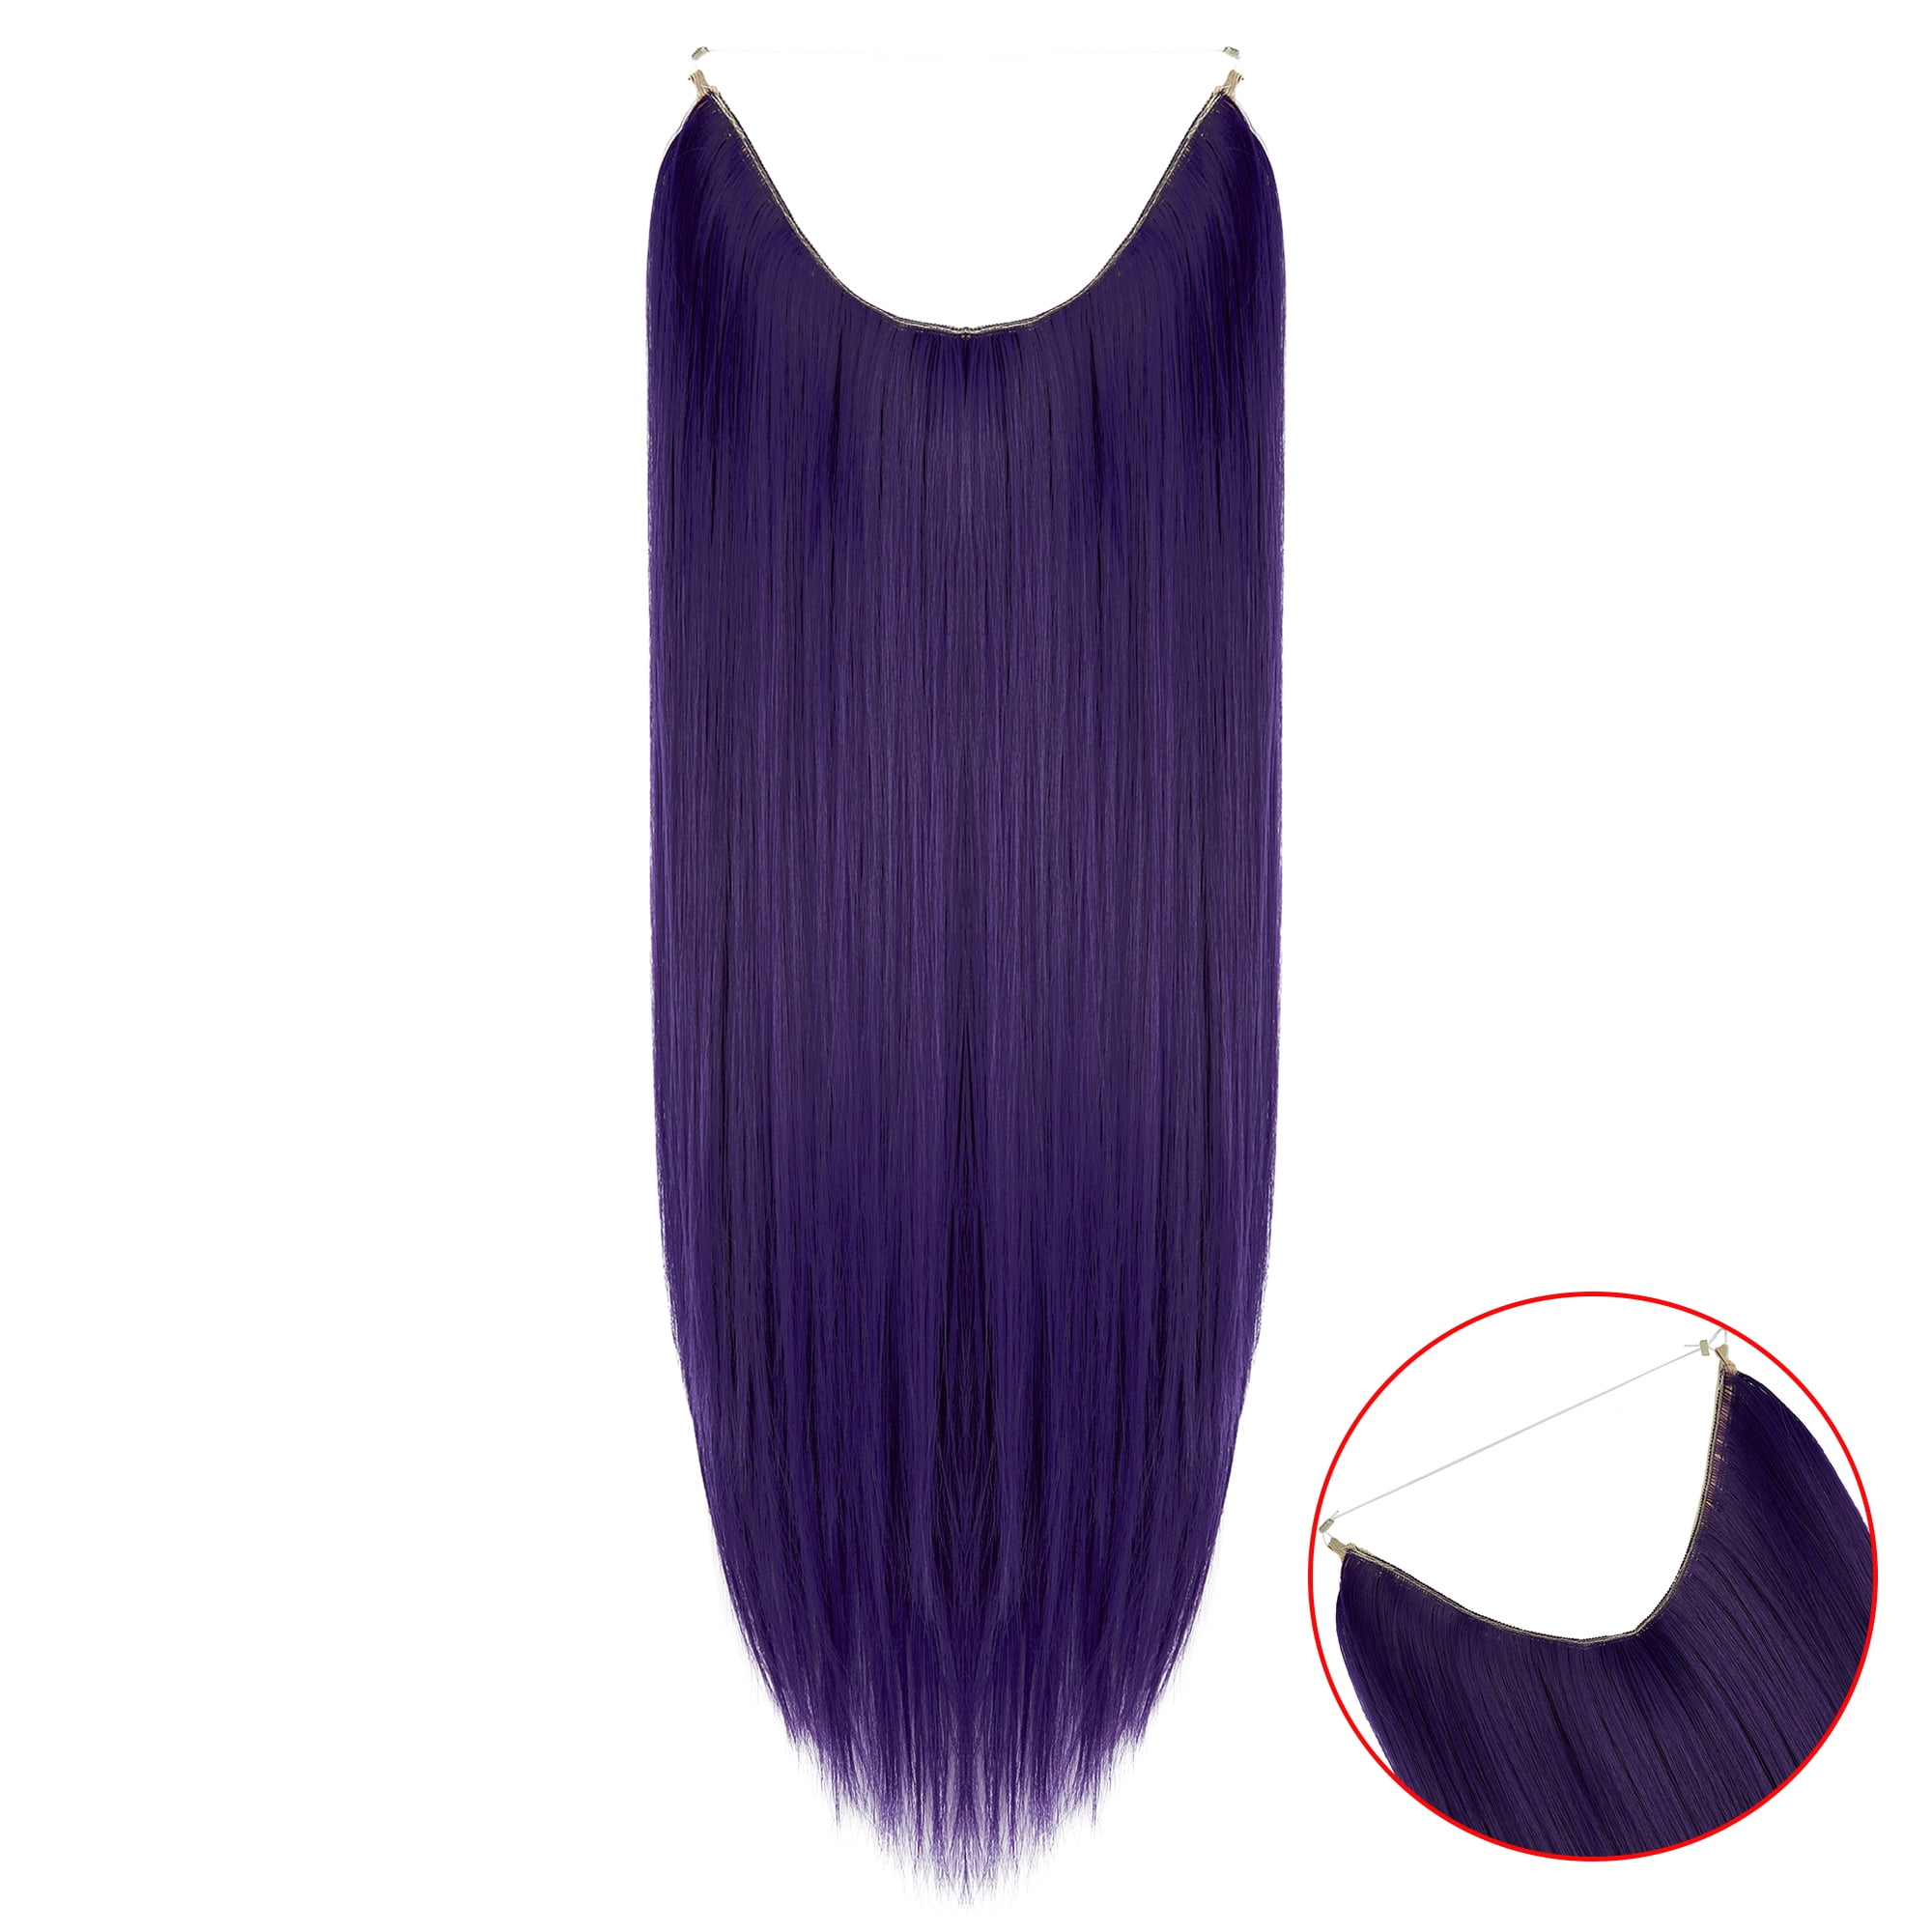 Streak Street Electric Purple Ombre Hair Extensions Reviews Online  Nykaa